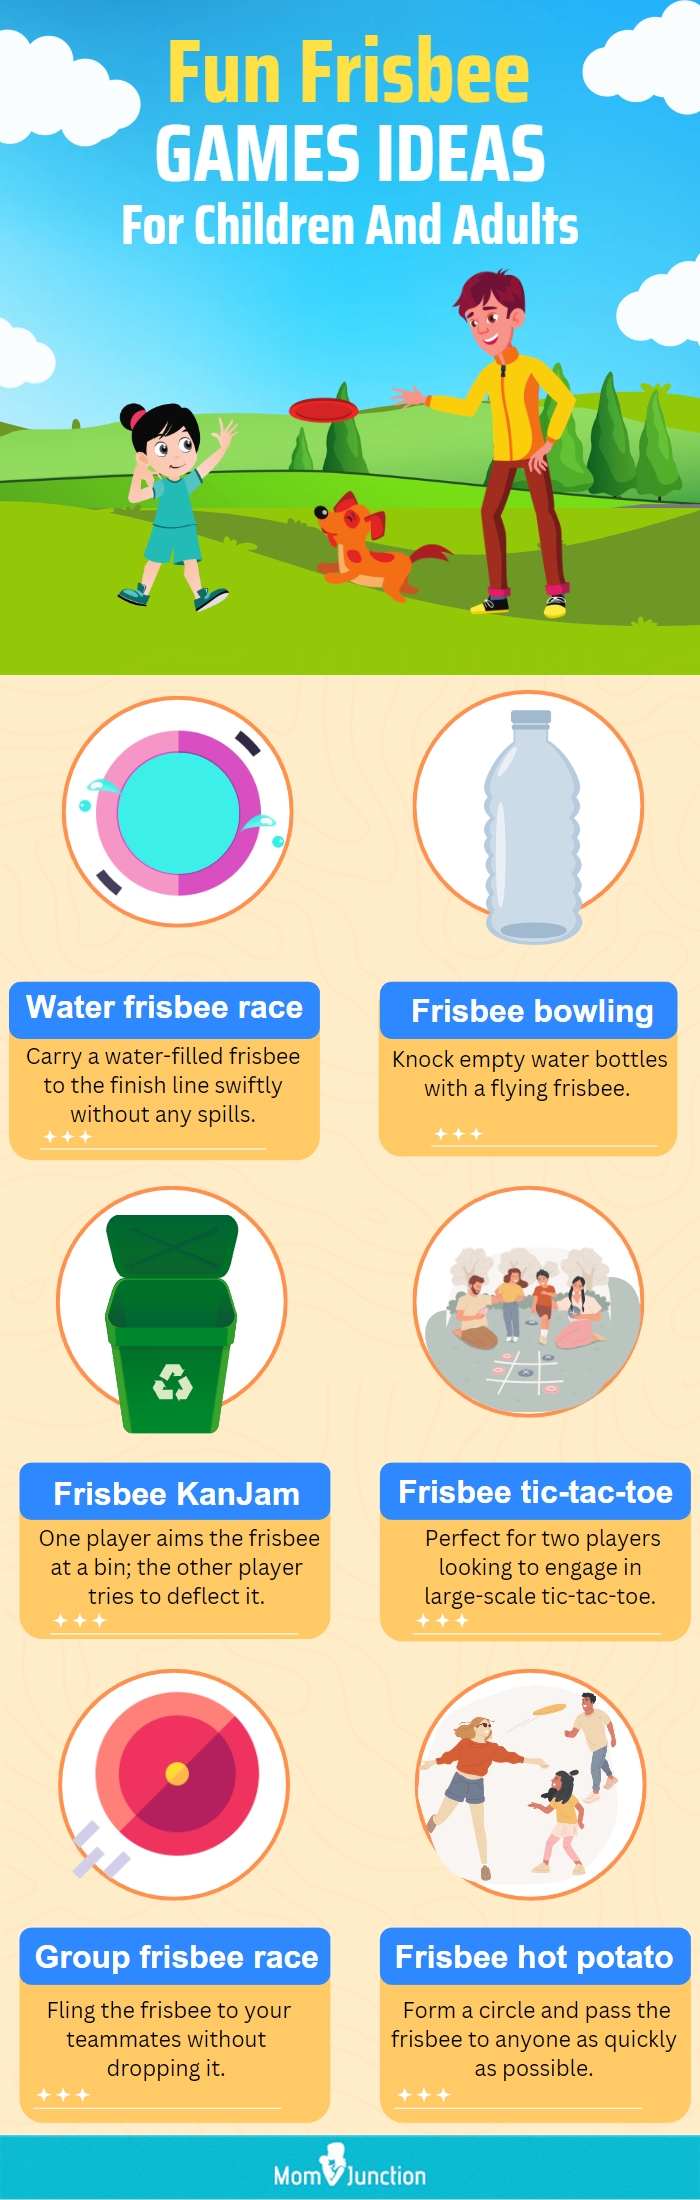 Fun Frisbee Games Ideas For Children And Adults Row 996, Content Topics (infographic)